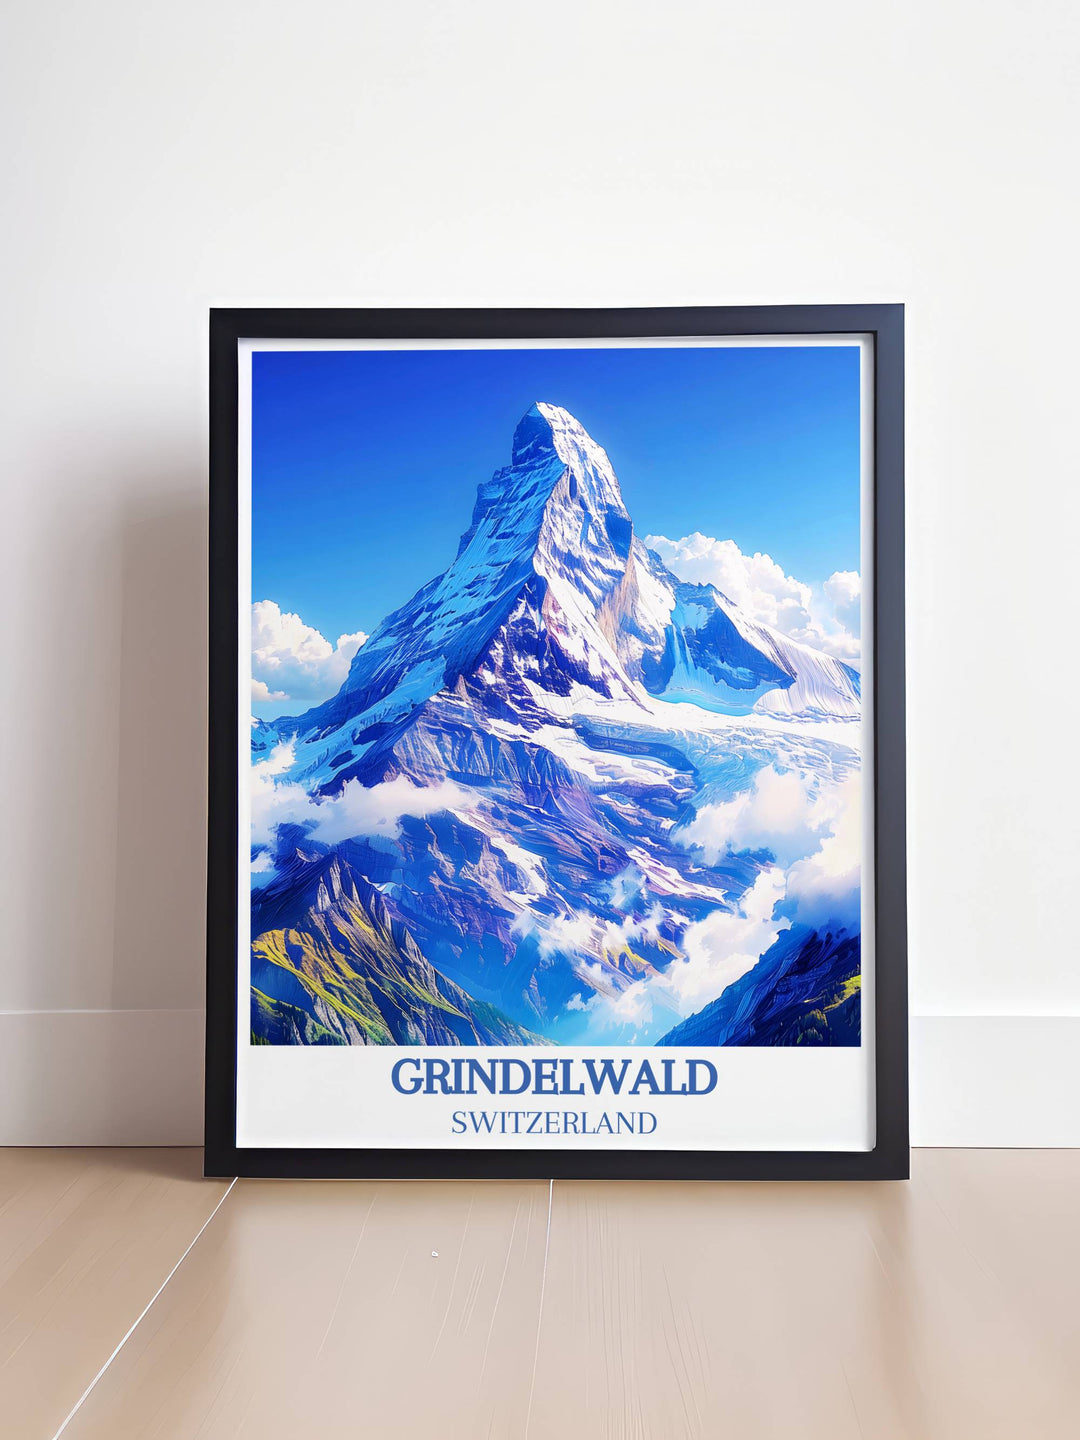 Panoramic view of Eiger Mountain towering over Grindelwald village with lush green fields and bright blue skies, perfect for a Swiss Alps print.